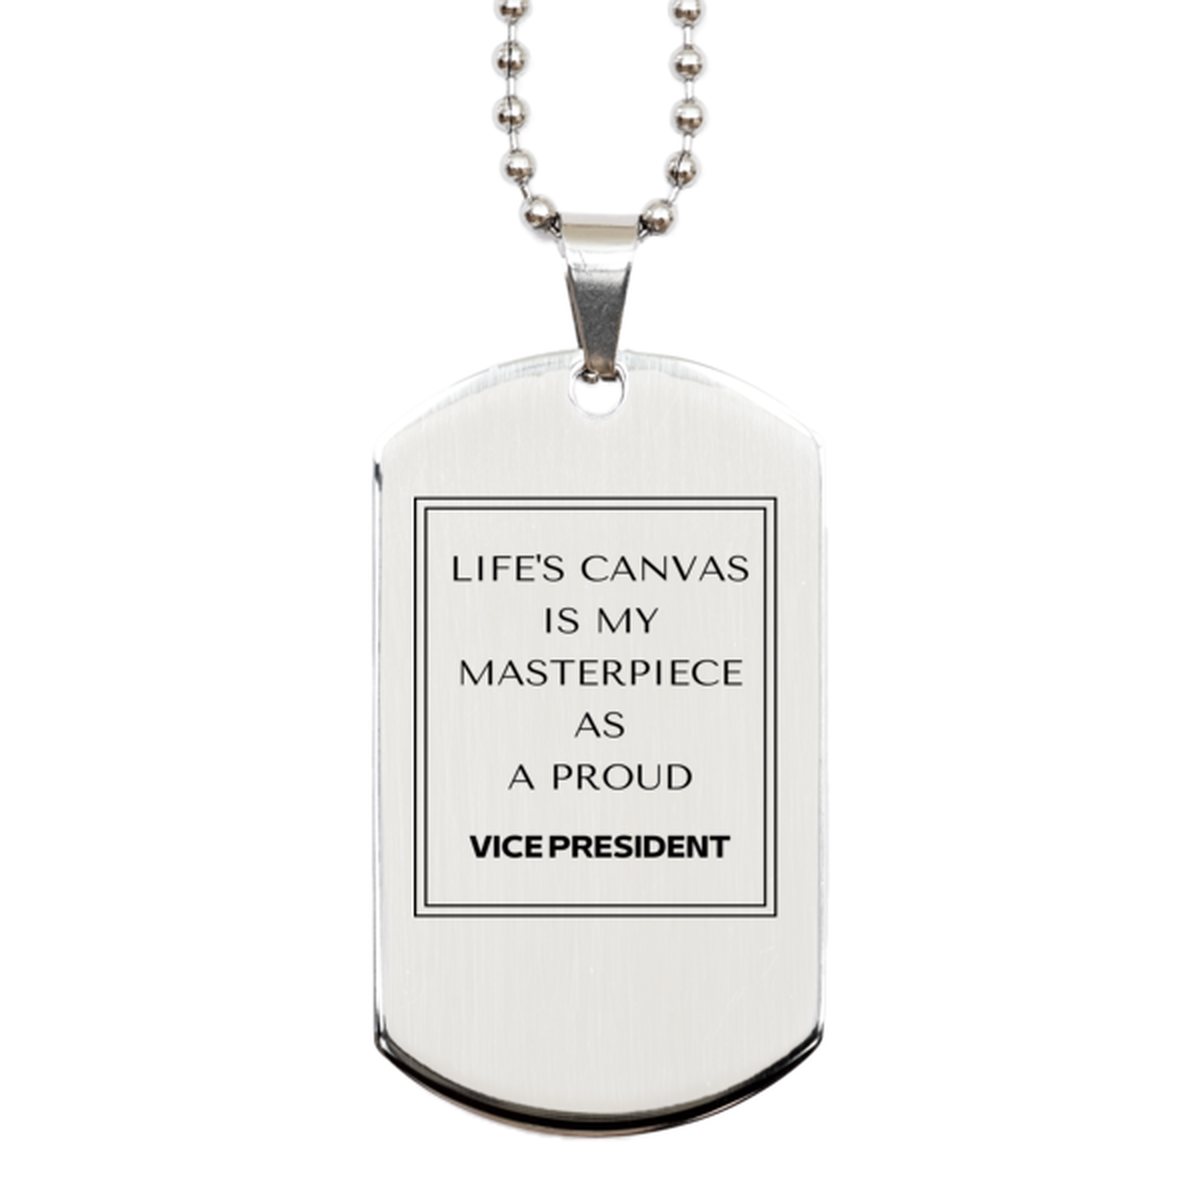 Proud Vice President Gifts, Life's canvas is my masterpiece, Epic Birthday Christmas Unique Silver Dog Tag For Vice President, Coworkers, Men, Women, Friends